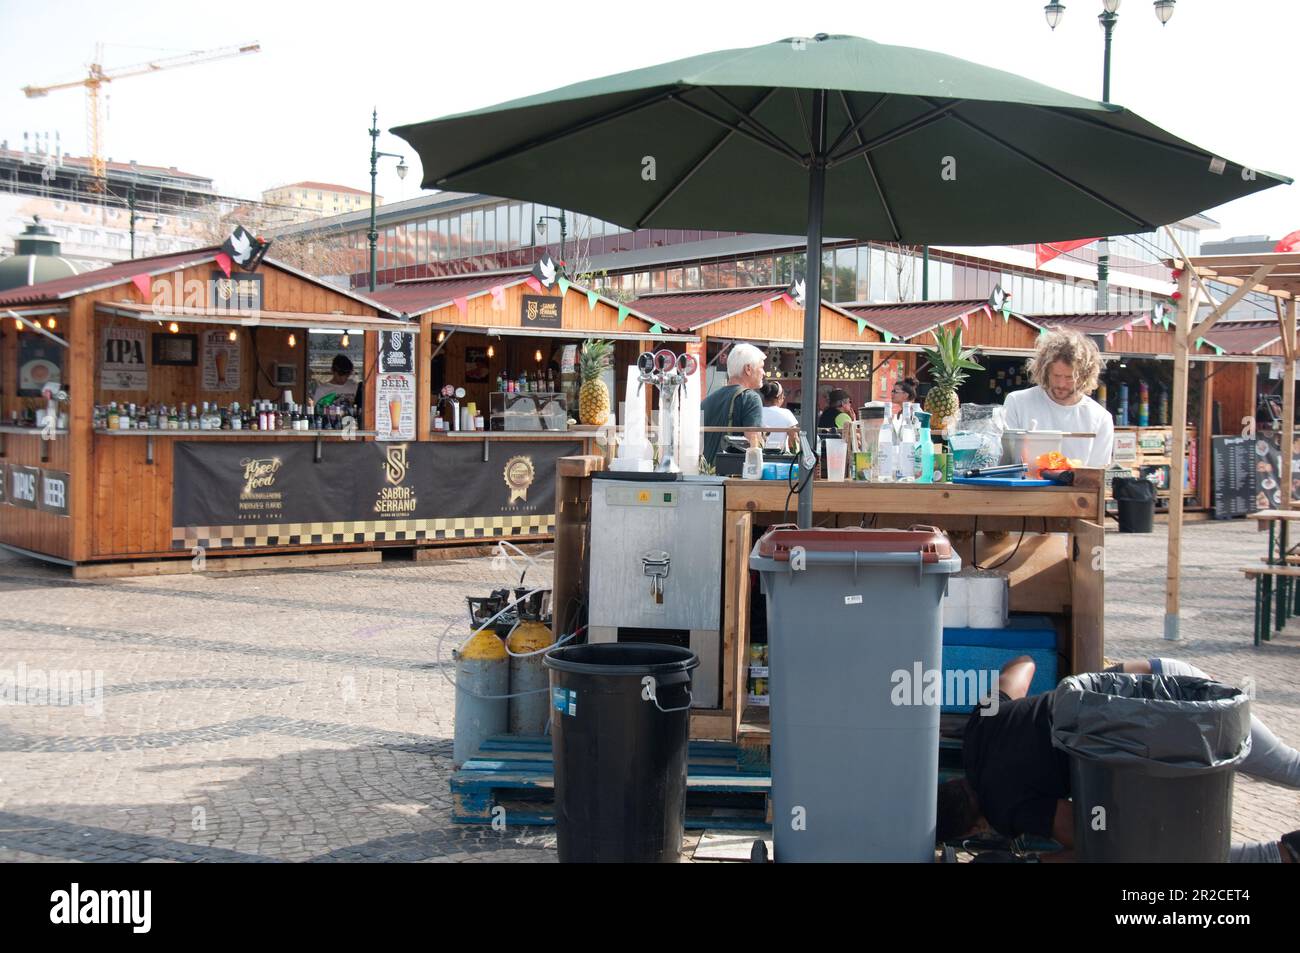 Riverside Stalls for Food and Drink, River Tagus, Lisbon, Portugal Stock Photo